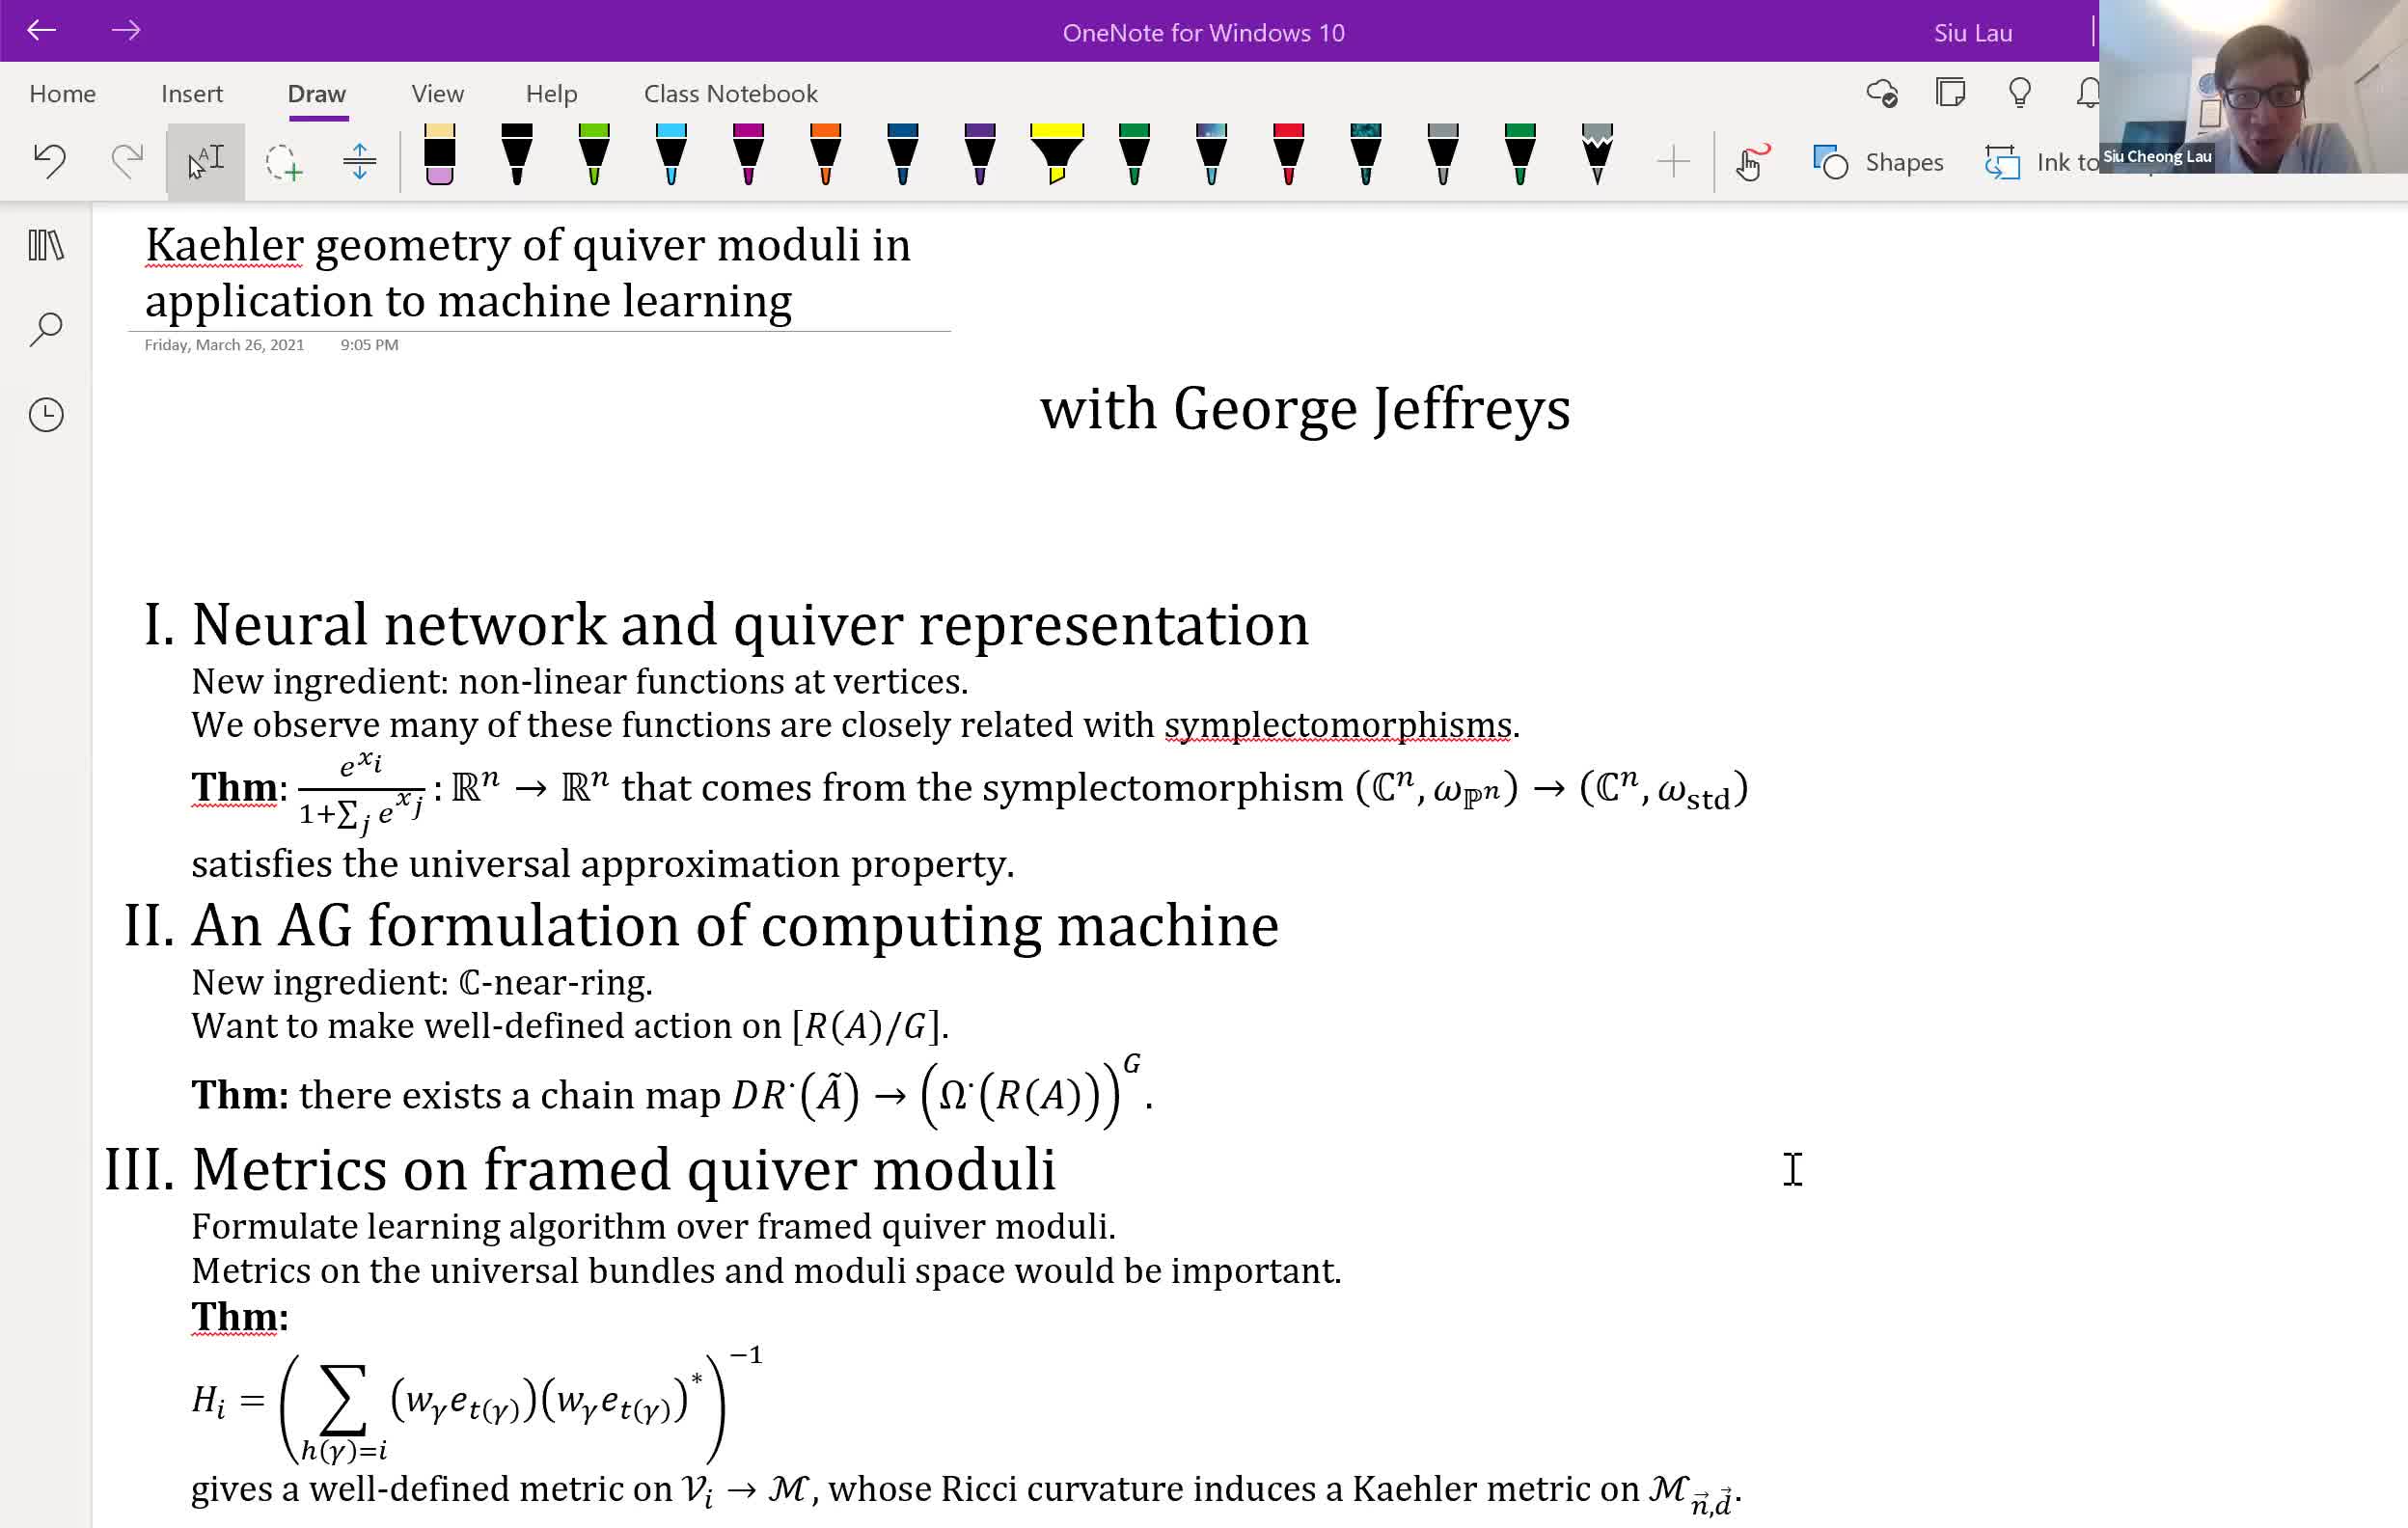  2021.07.06 Kaehler geometry of quiver moduli in application to machine learning